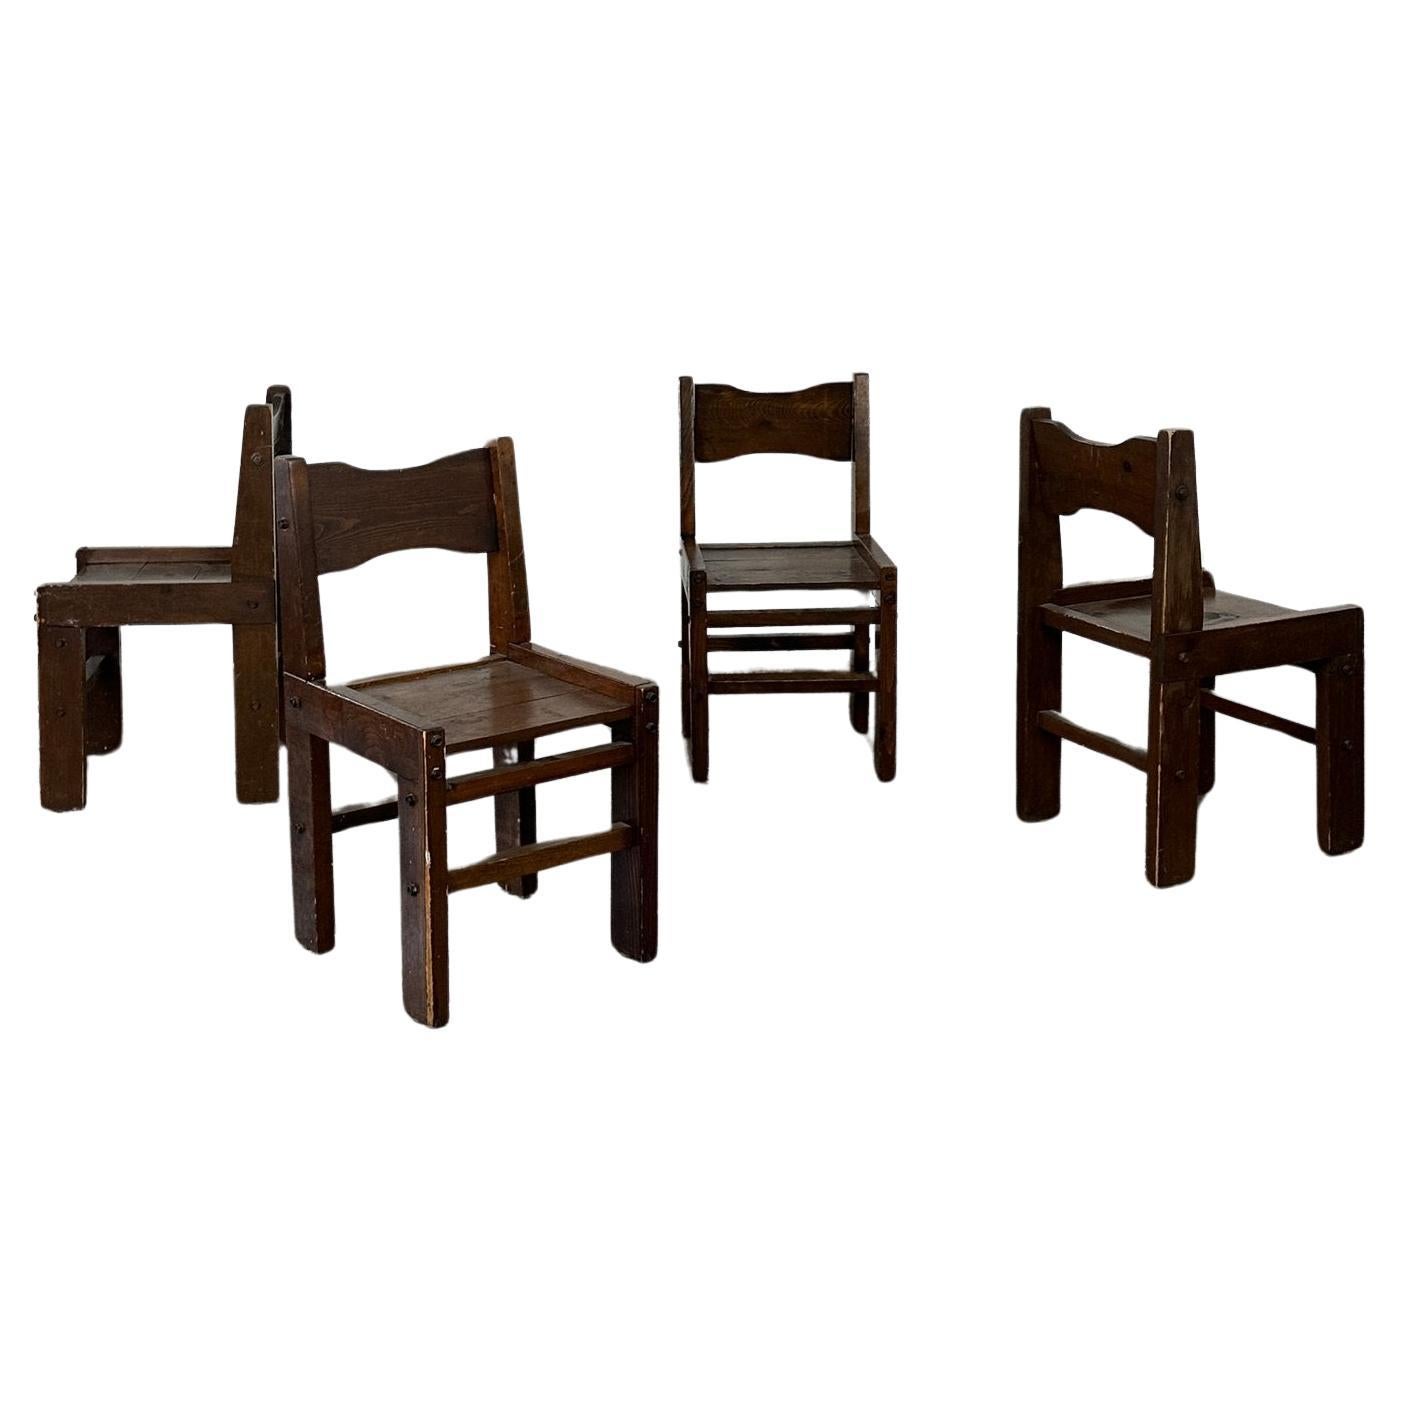 Rustic Tilt Back Dining Chairs - Set of Four